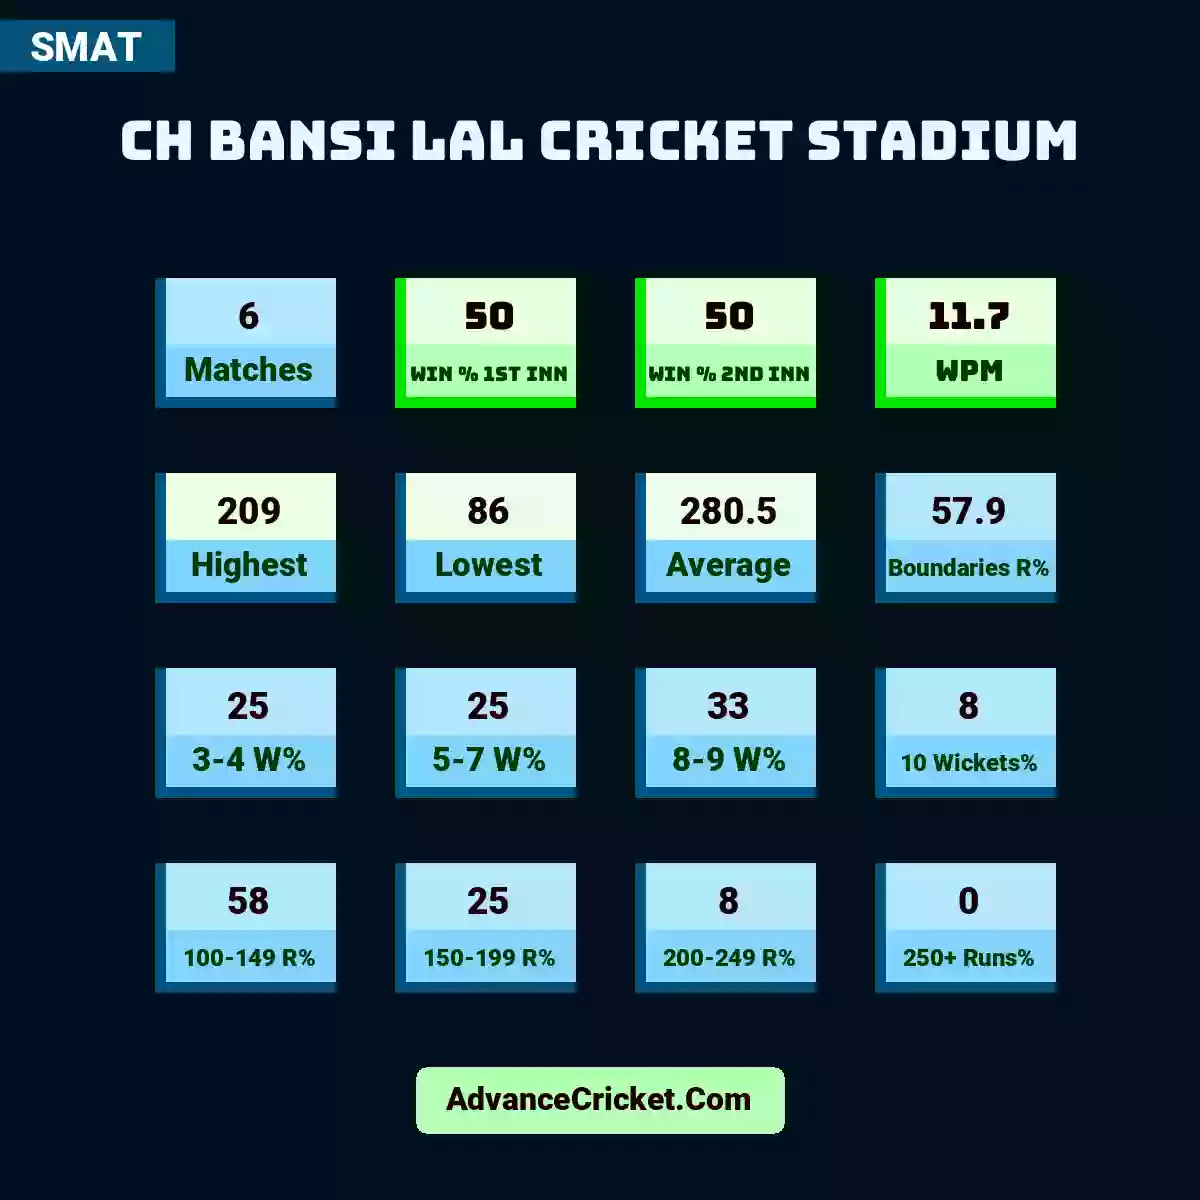 Image showing CH Bansi Lal Cricket Stadium with Matches: 6, Win % 1st Inn: 50, Win % 2nd Inn: 50, WPM: 11.7, Highest: 209, Lowest: 86, Average: 280.5, Boundaries R%: 57.9, 3-4 W%: 25, 5-7 W%: 25, 8-9 W%: 33, 10 Wickets%: 8, 100-149 R%: 58, 150-199 R%: 25, 200-249 R%: 8, 250+ Runs%: 0.